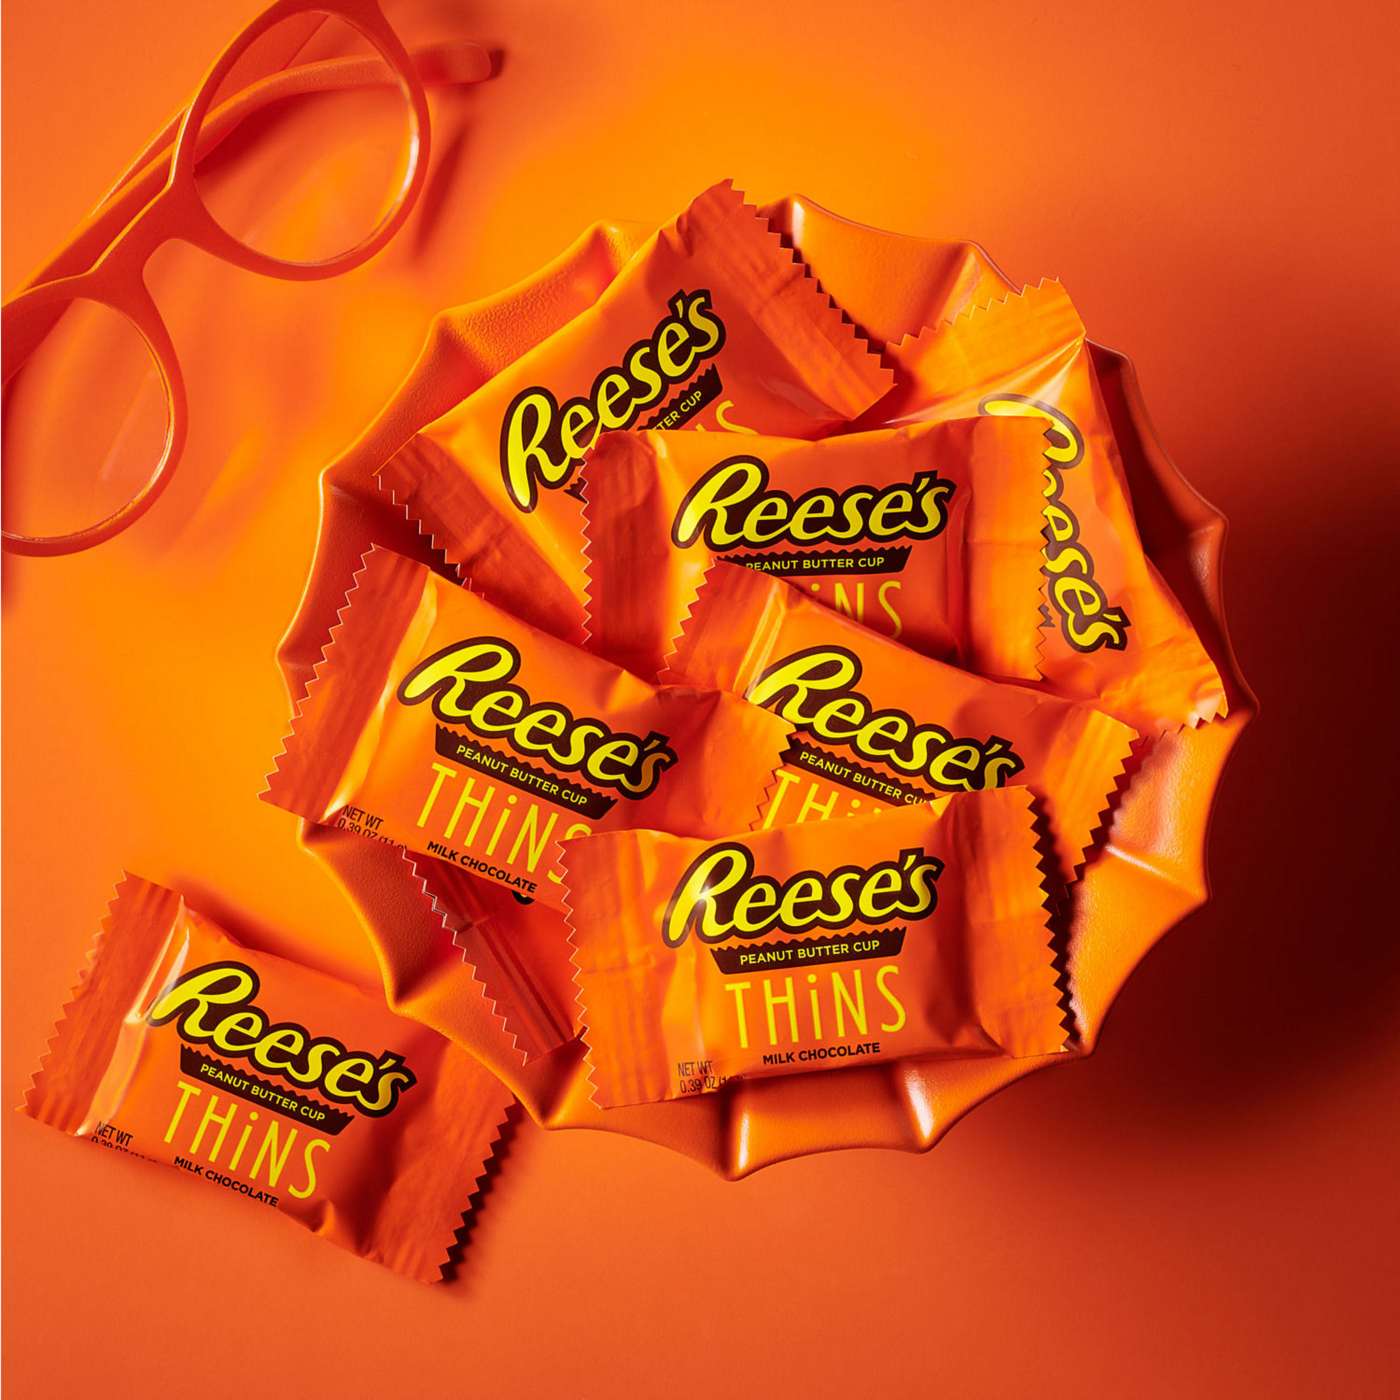 Reese's Thins Milk Chocolate Peanut Butter Cups Candy - Share Pack; image 4 of 7